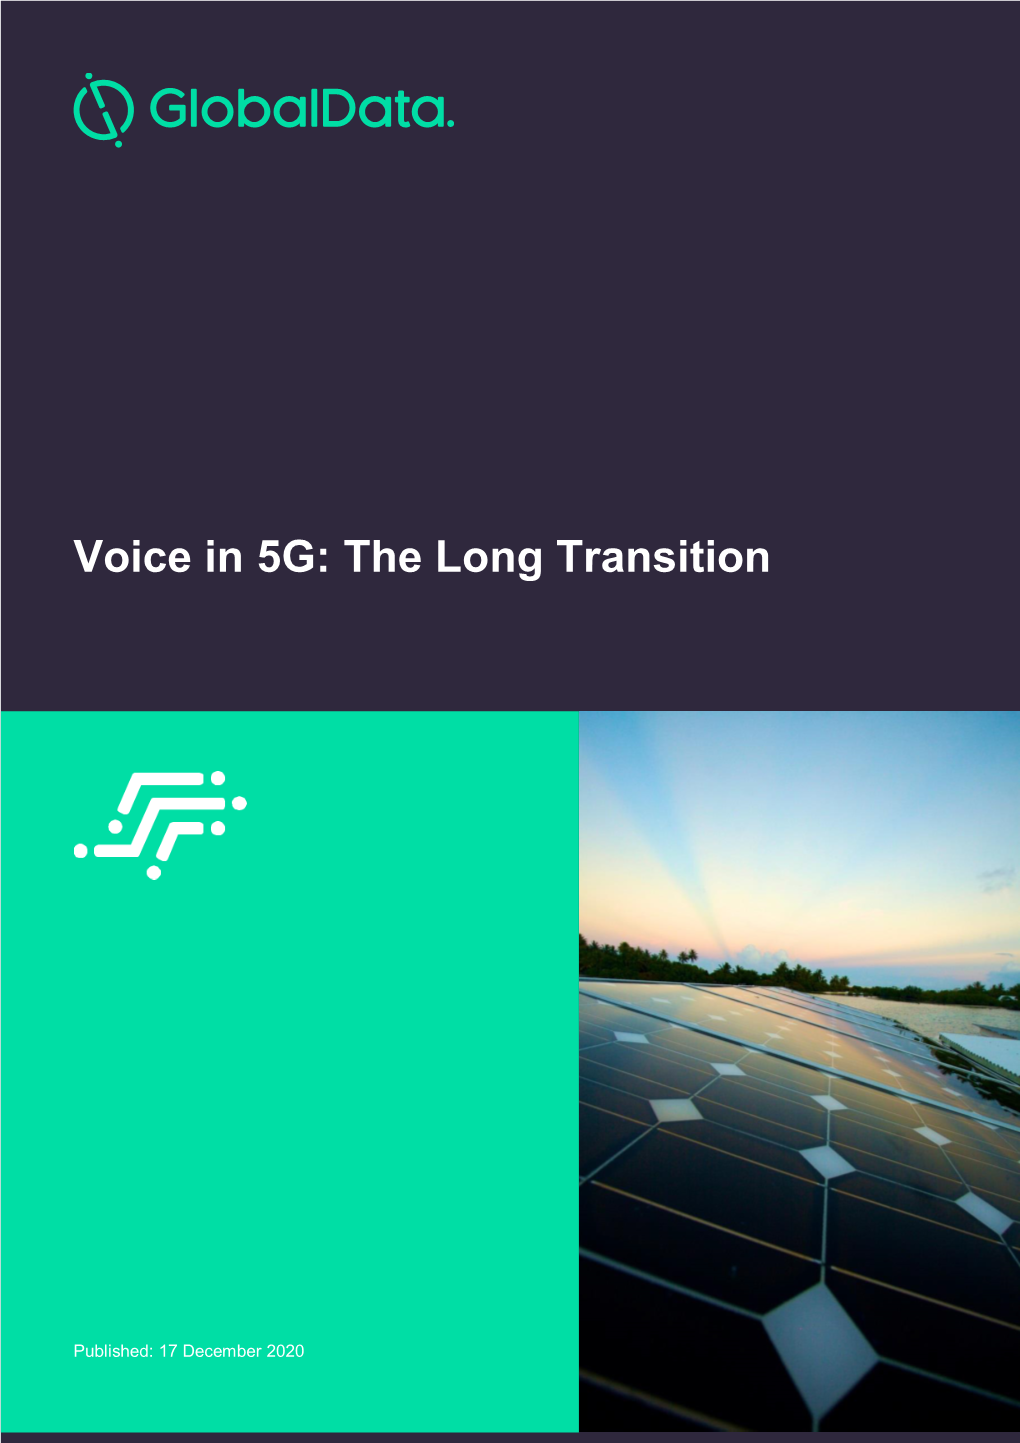 Voice in 5G: the Long Transition